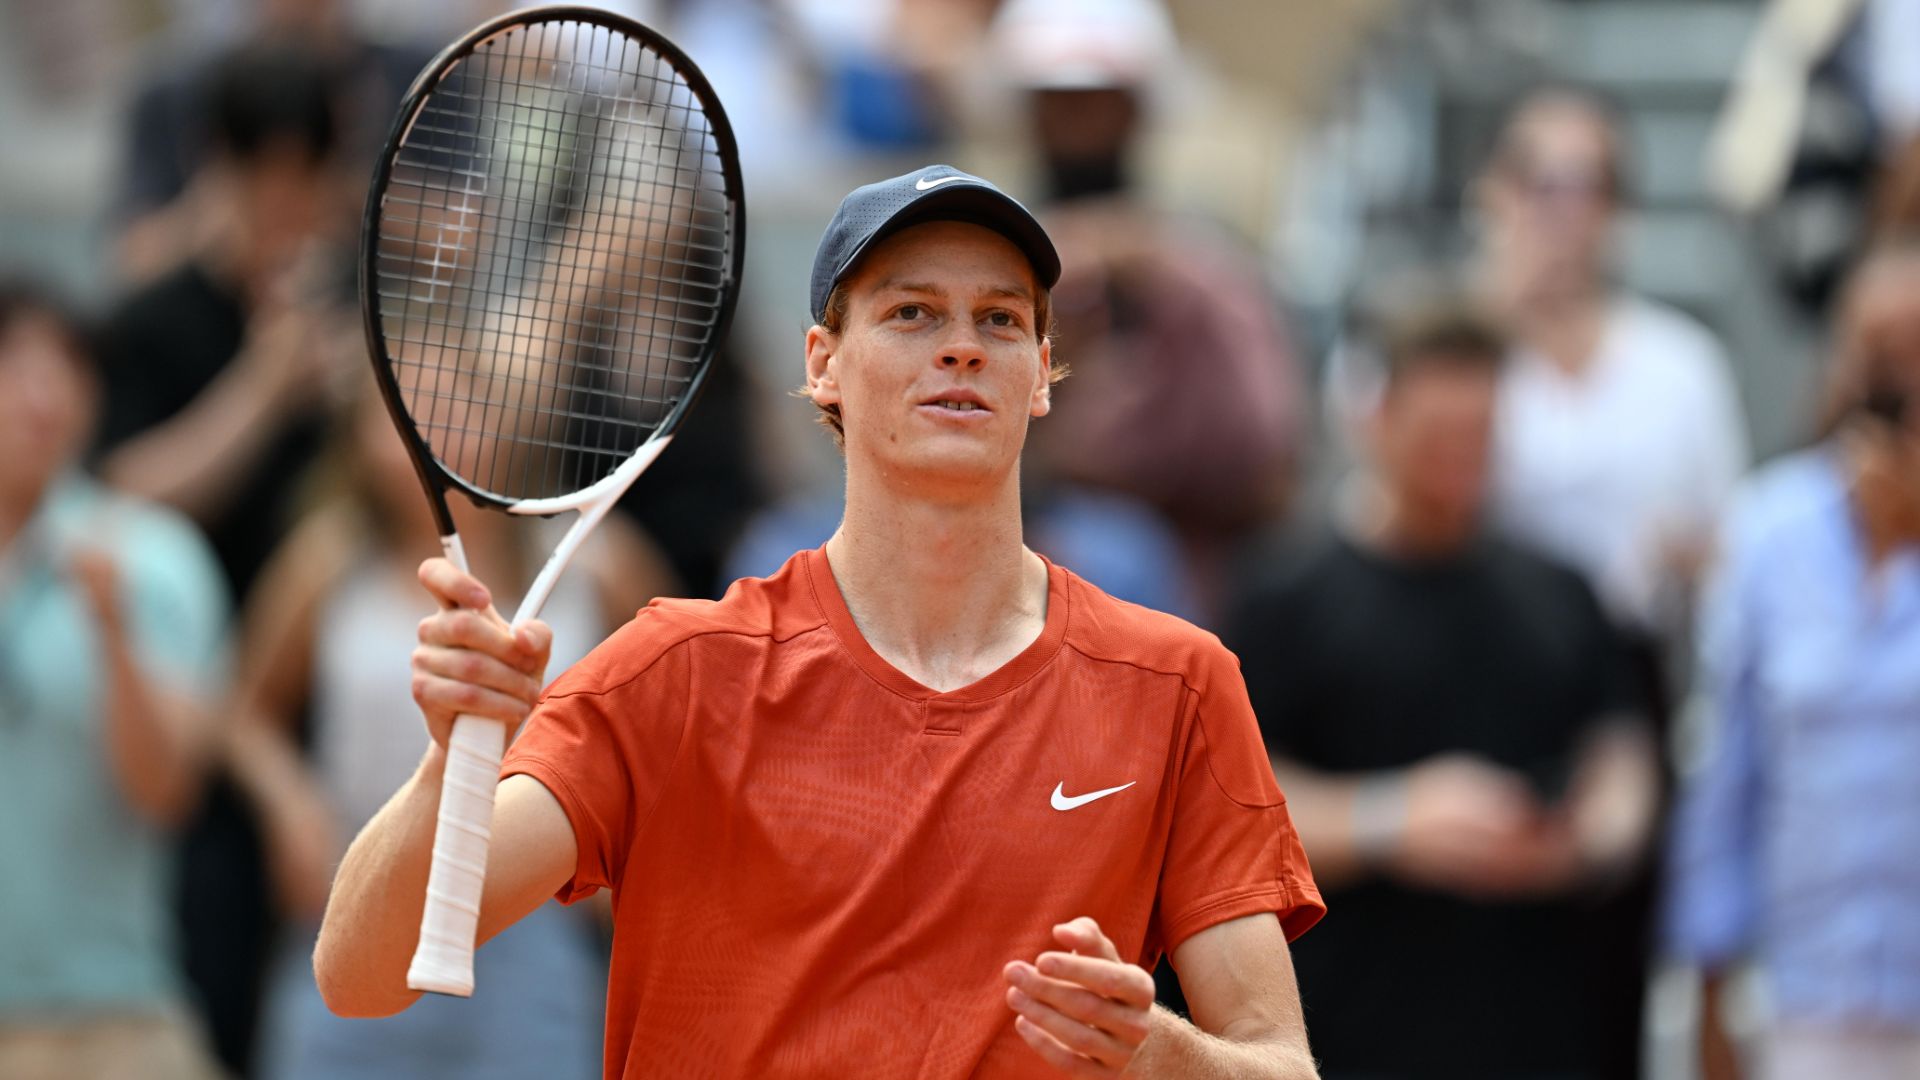 Sinner sails into French Open semis